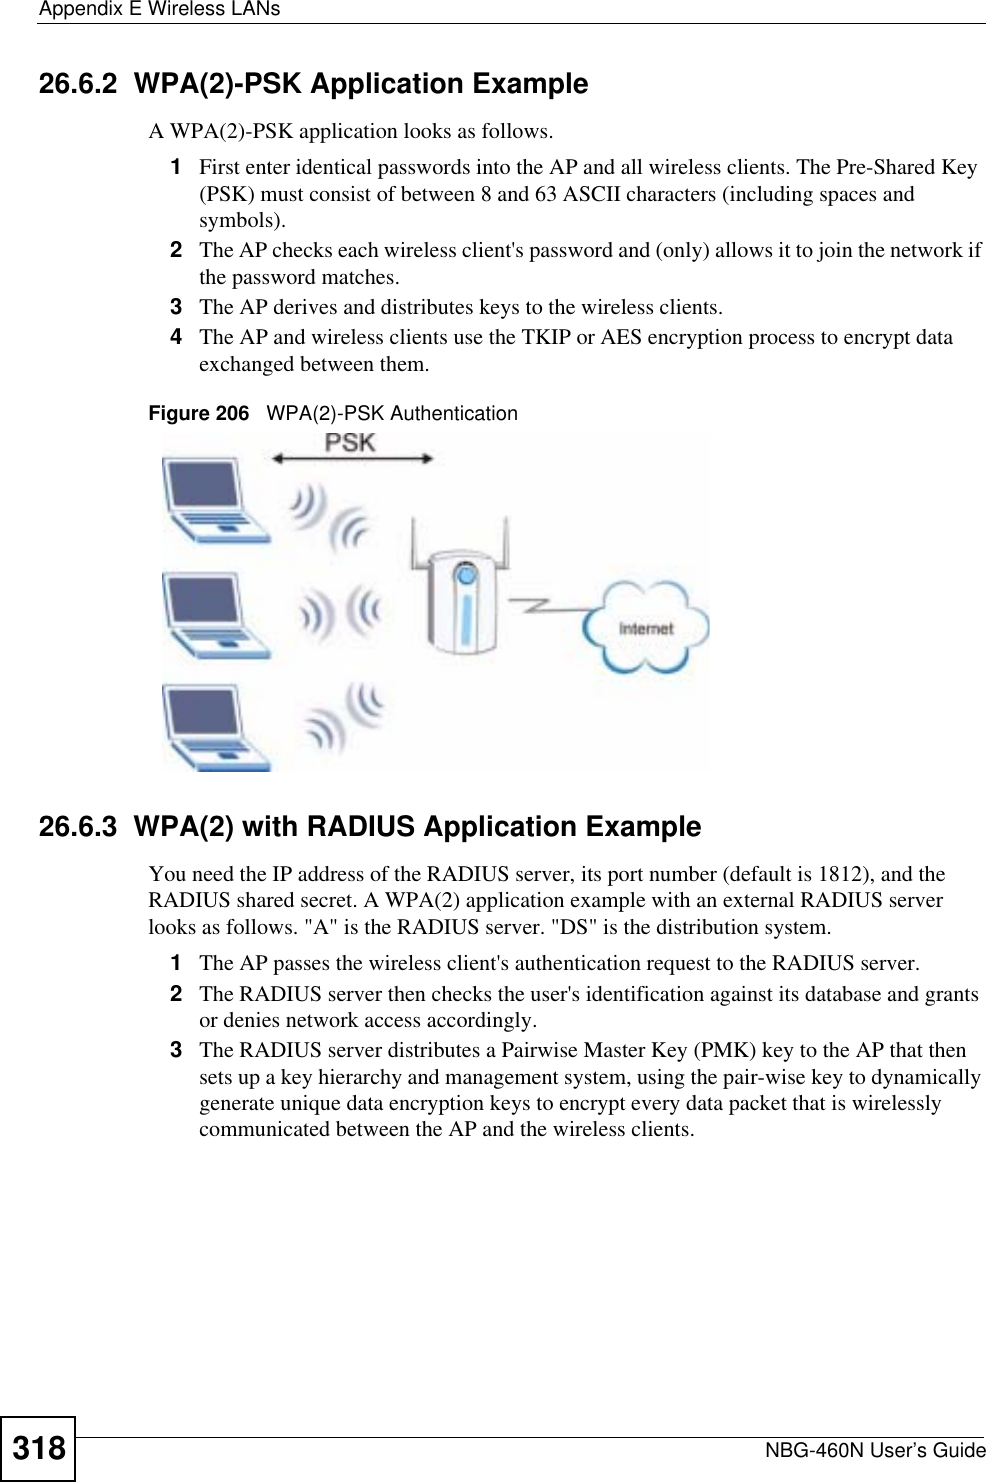 Appendix E Wireless LANsNBG-460N User’s Guide31826.6.2  WPA(2)-PSK Application ExampleA WPA(2)-PSK application looks as follows.1First enter identical passwords into the AP and all wireless clients. The Pre-Shared Key (PSK) must consist of between 8 and 63 ASCII characters (including spaces and symbols).2The AP checks each wireless client&apos;s password and (only) allows it to join the network if the password matches.3The AP derives and distributes keys to the wireless clients.4The AP and wireless clients use the TKIP or AES encryption process to encrypt data exchanged between them.Figure 206   WPA(2)-PSK Authentication26.6.3  WPA(2) with RADIUS Application ExampleYou need the IP address of the RADIUS server, its port number (default is 1812), and the RADIUS shared secret. A WPA(2) application example with an external RADIUS server looks as follows. &quot;A&quot; is the RADIUS server. &quot;DS&quot; is the distribution system.1The AP passes the wireless client&apos;s authentication request to the RADIUS server.2The RADIUS server then checks the user&apos;s identification against its database and grants or denies network access accordingly.3The RADIUS server distributes a Pairwise Master Key (PMK) key to the AP that then sets up a key hierarchy and management system, using the pair-wise key to dynamically generate unique data encryption keys to encrypt every data packet that is wirelessly communicated between the AP and the wireless clients. 